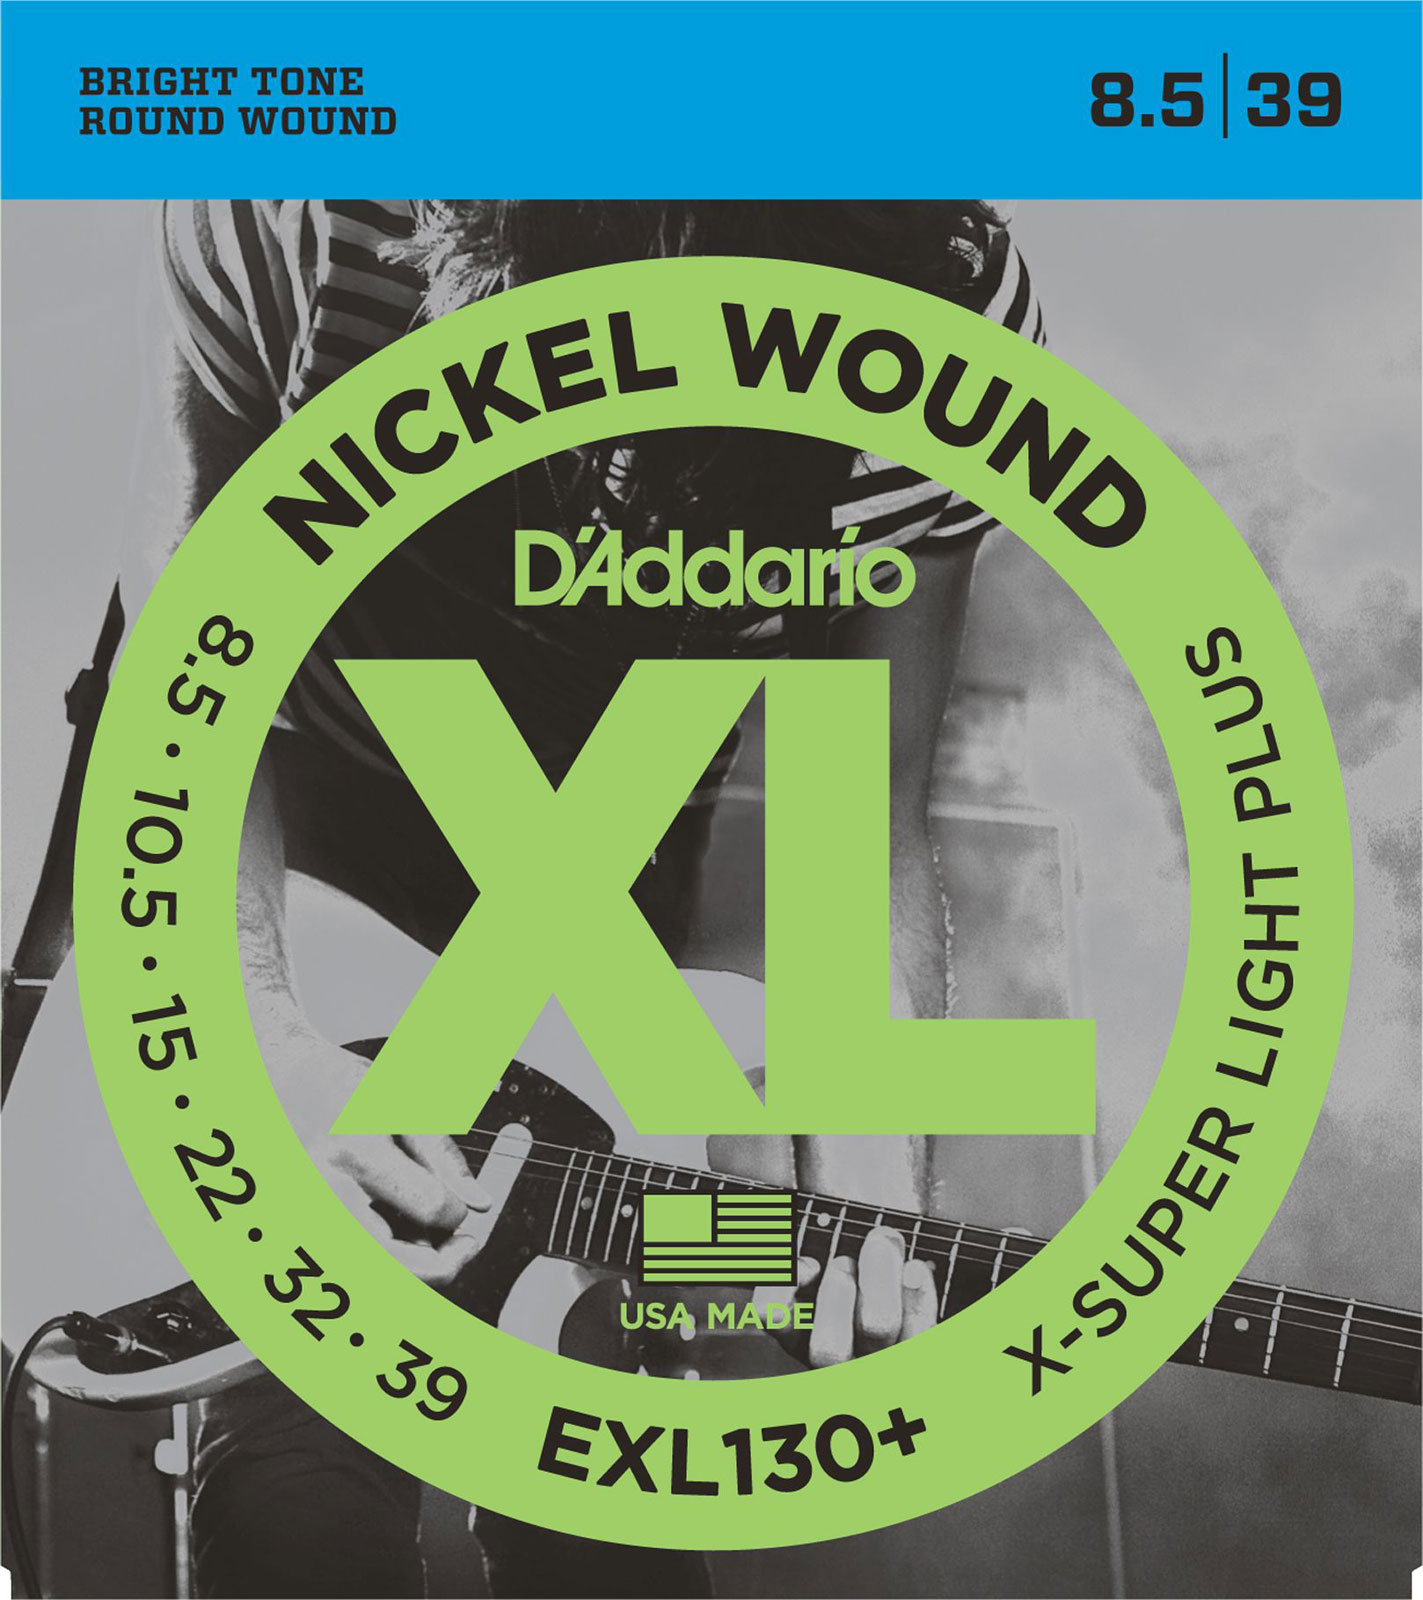 D'ADDARIO AND CO EXL130+ NICKEL WOUND EXTRA-SUPER LIGHT PLUS 8.5-39